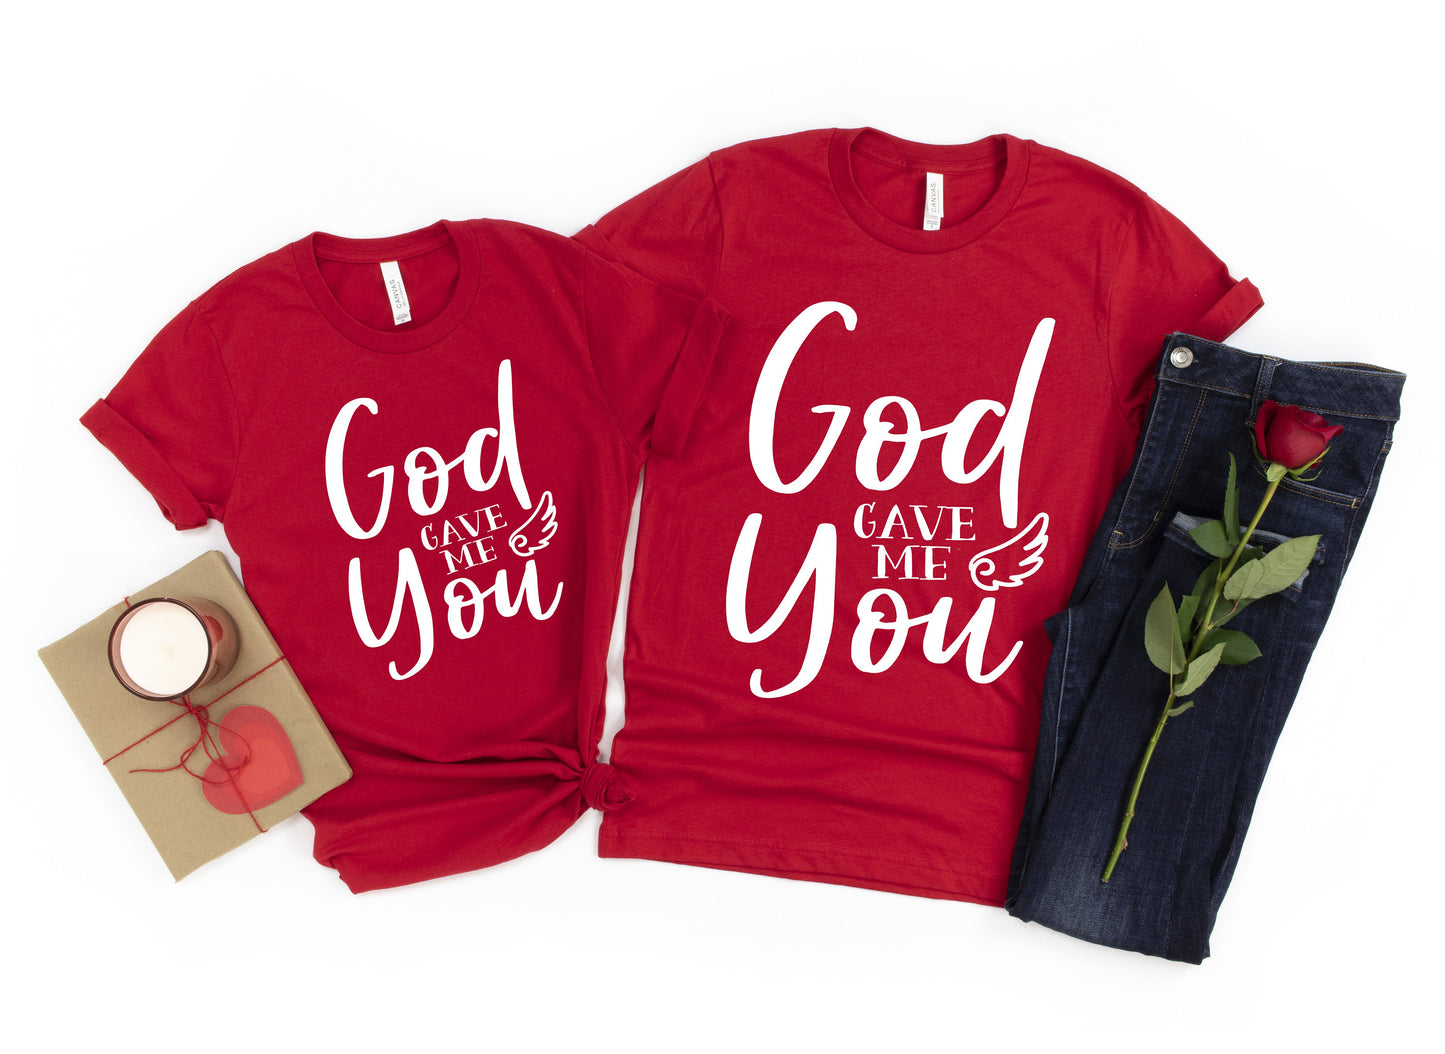 God Gave Me You Valentine's Day Couples t-shirt - Valentine's shirt - Christian T-shirts - Matching Couples Shirts